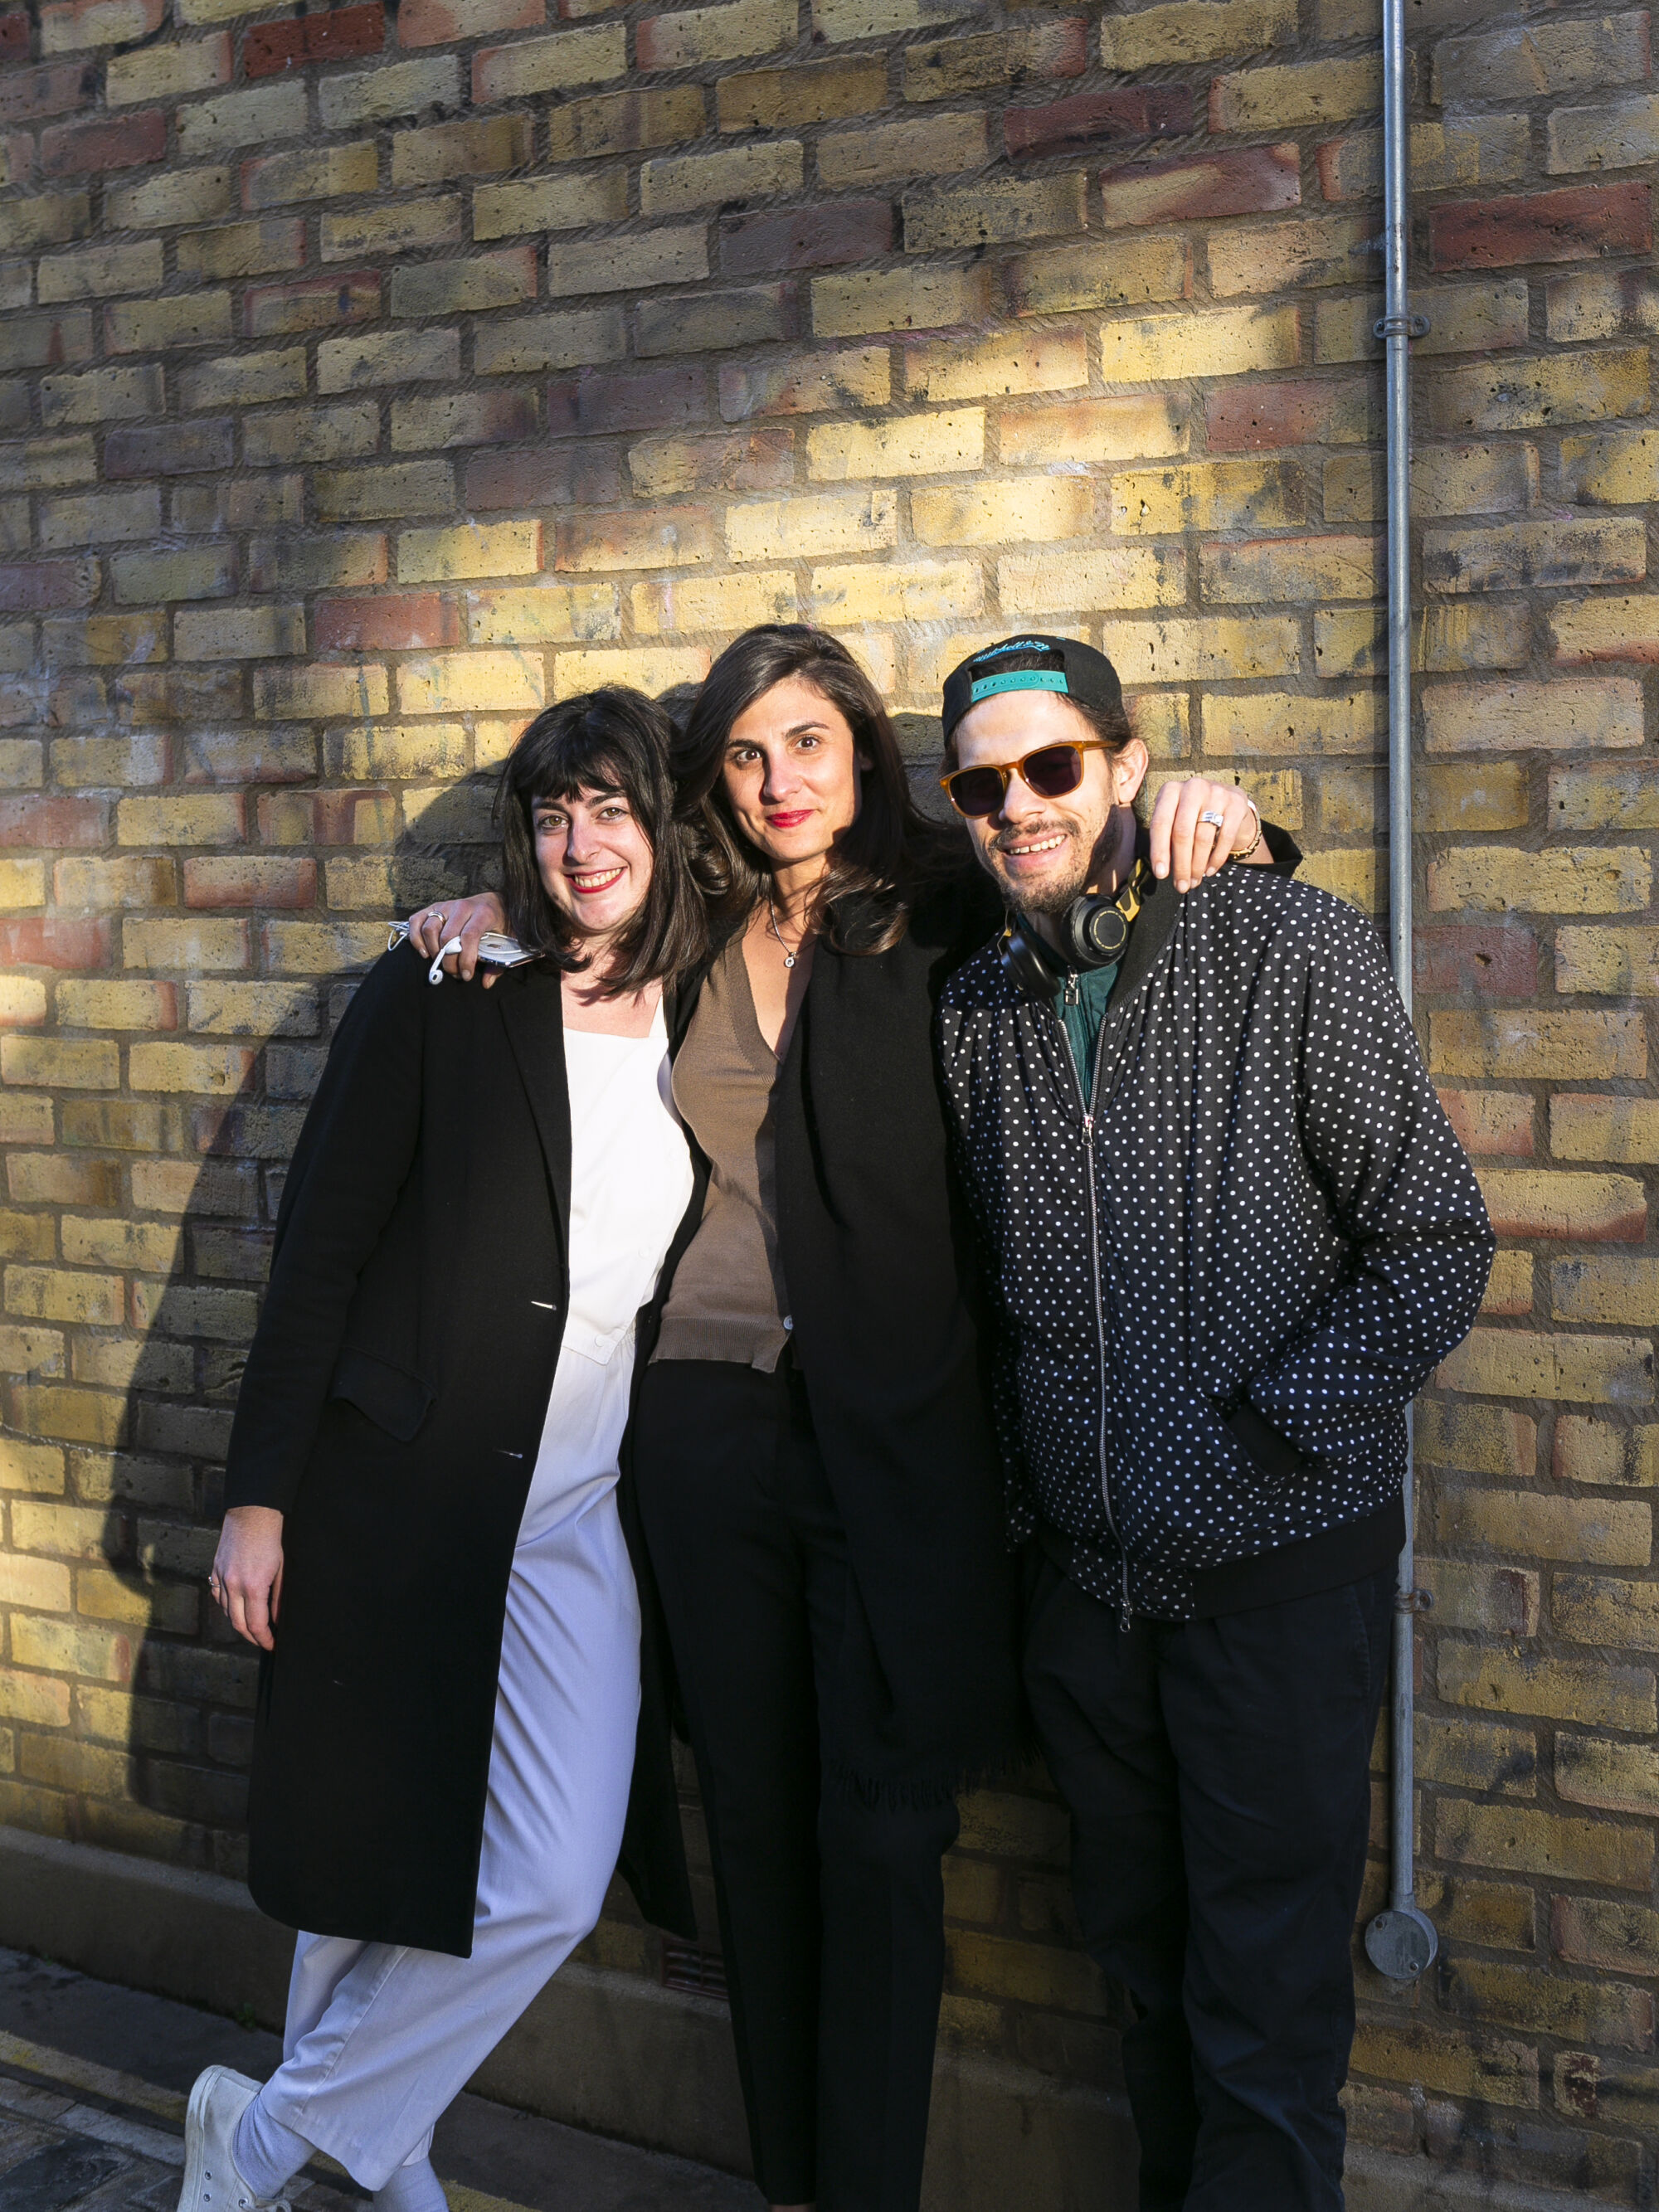 The Wick - Marisa Bellani with artists Alix Marie and Antony Cairns. (c) Ollie Hammick, 2019
@marisabellani @afnmarie @antony_cairns